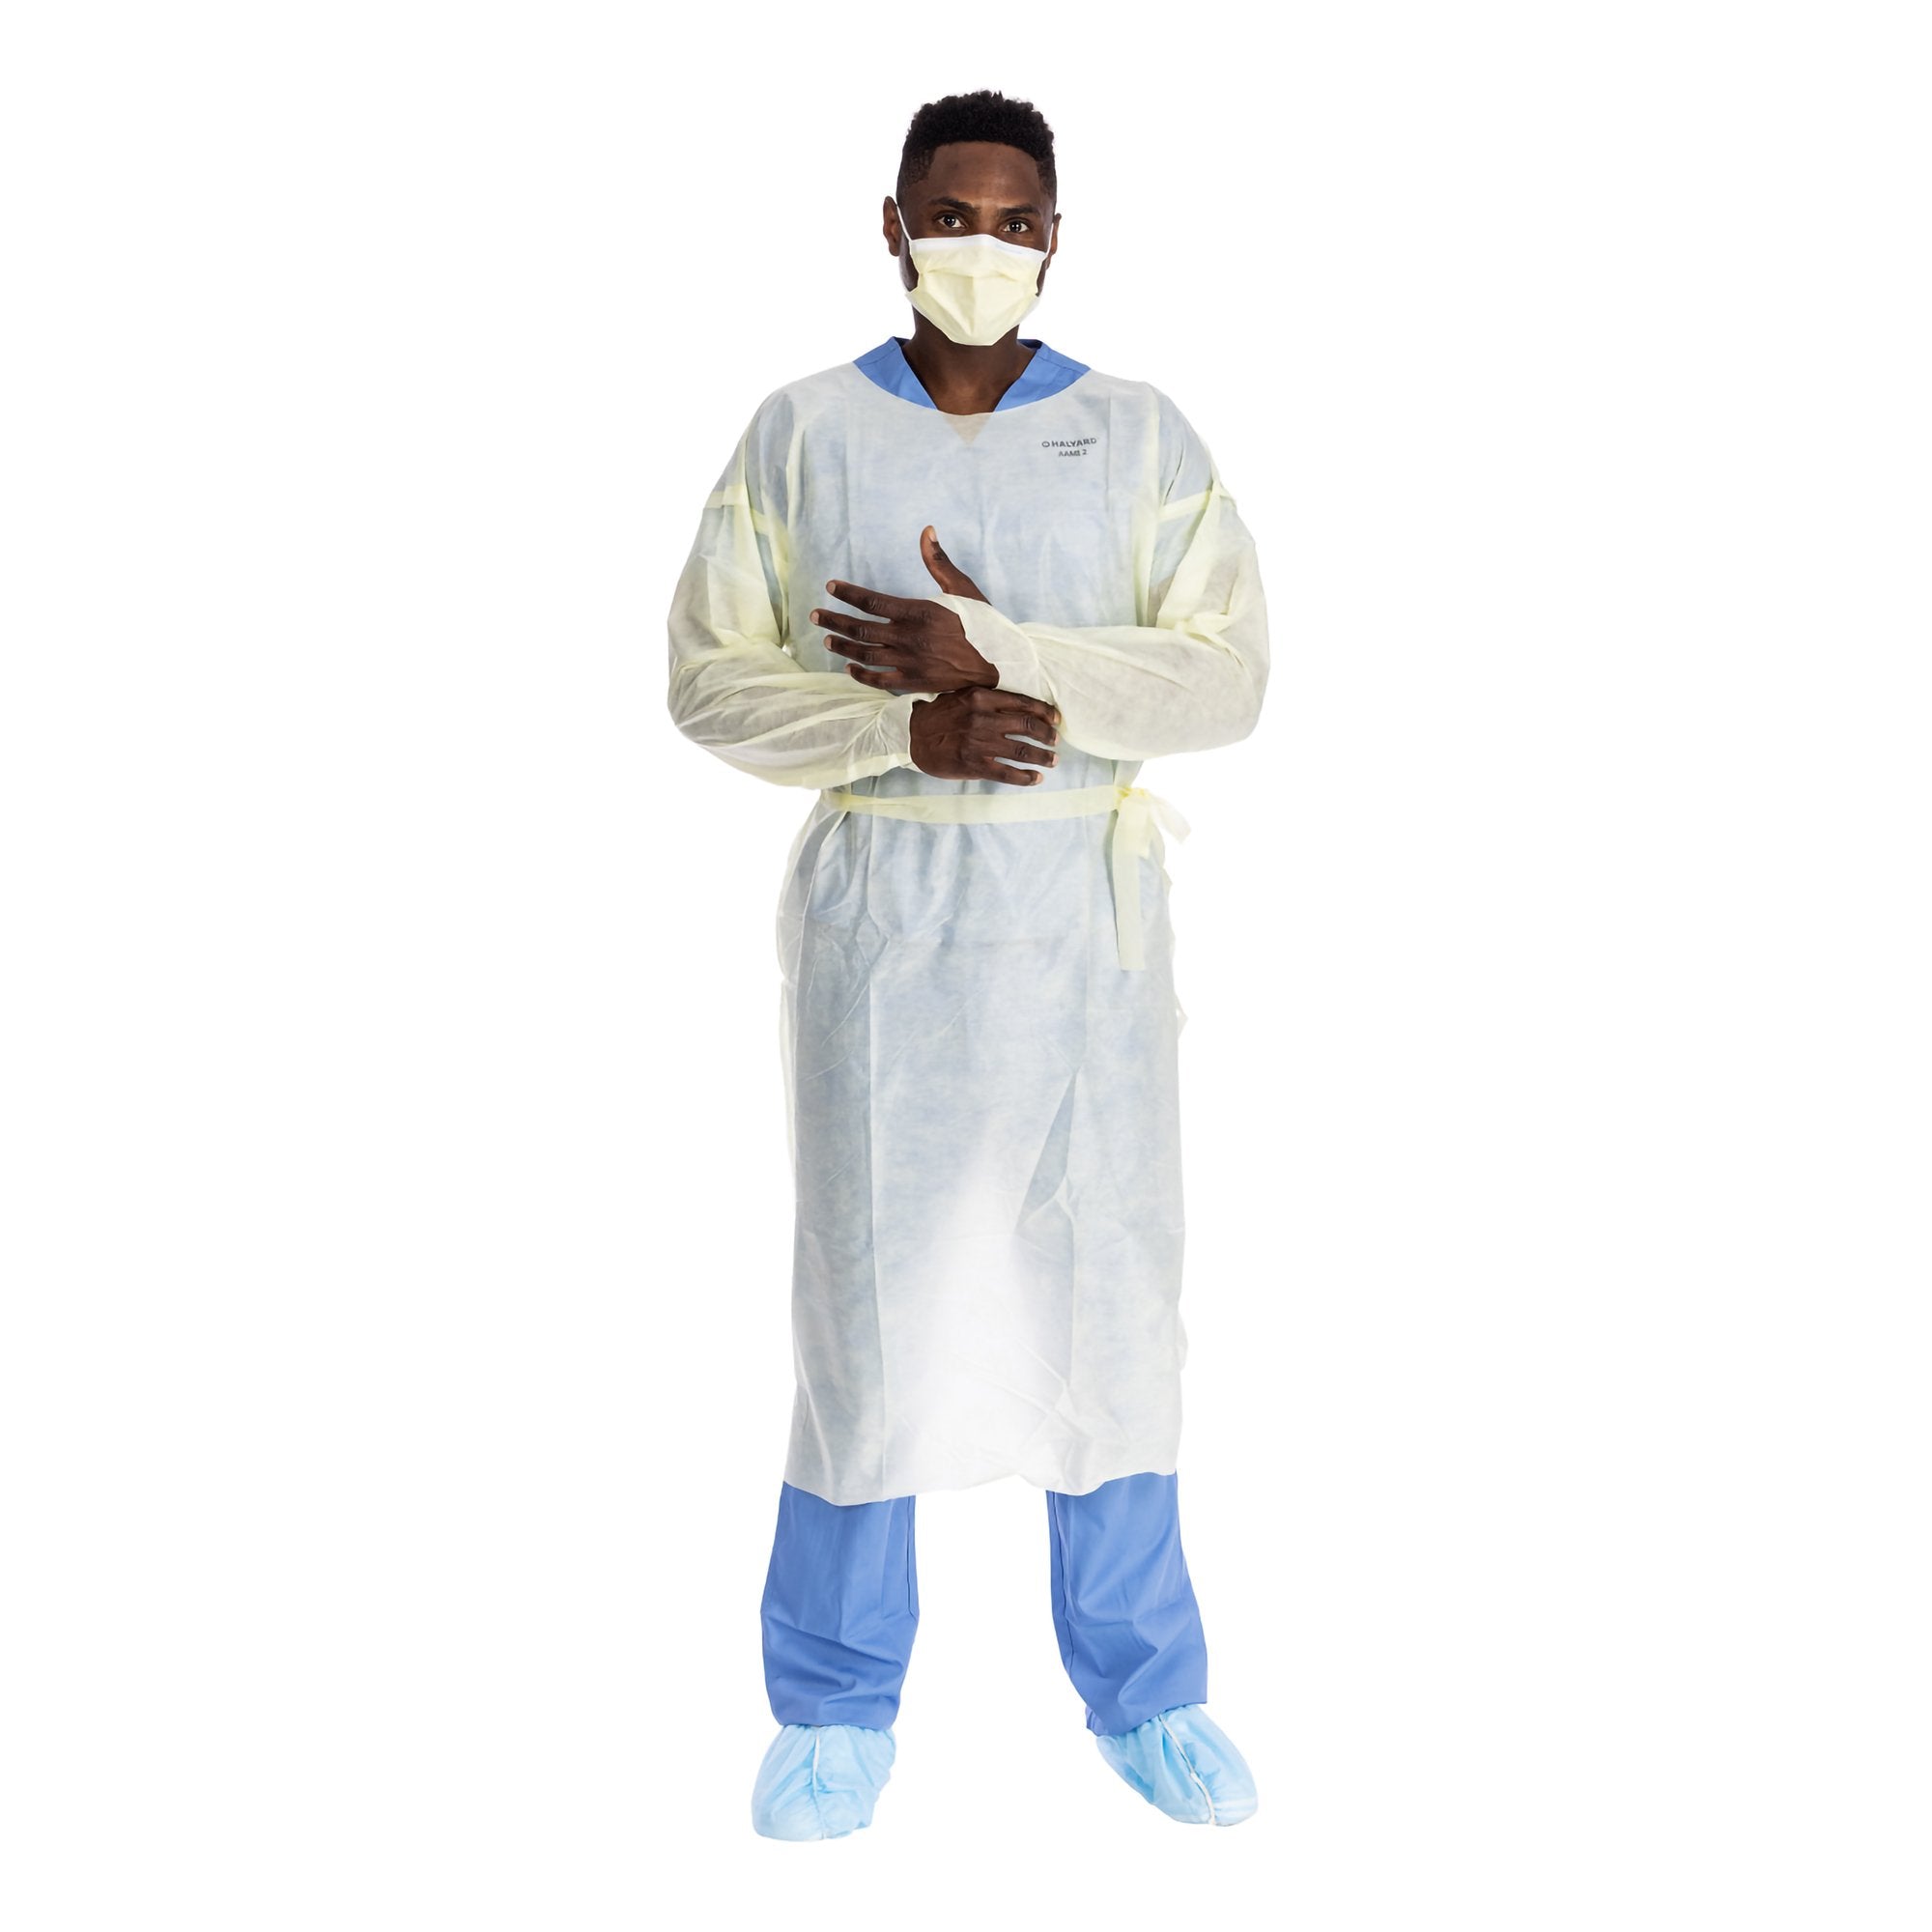 Protective Procedure Gown Halyard Basics Large Yellow NonSterile AAMI Level 2 Disposable (10 Units)